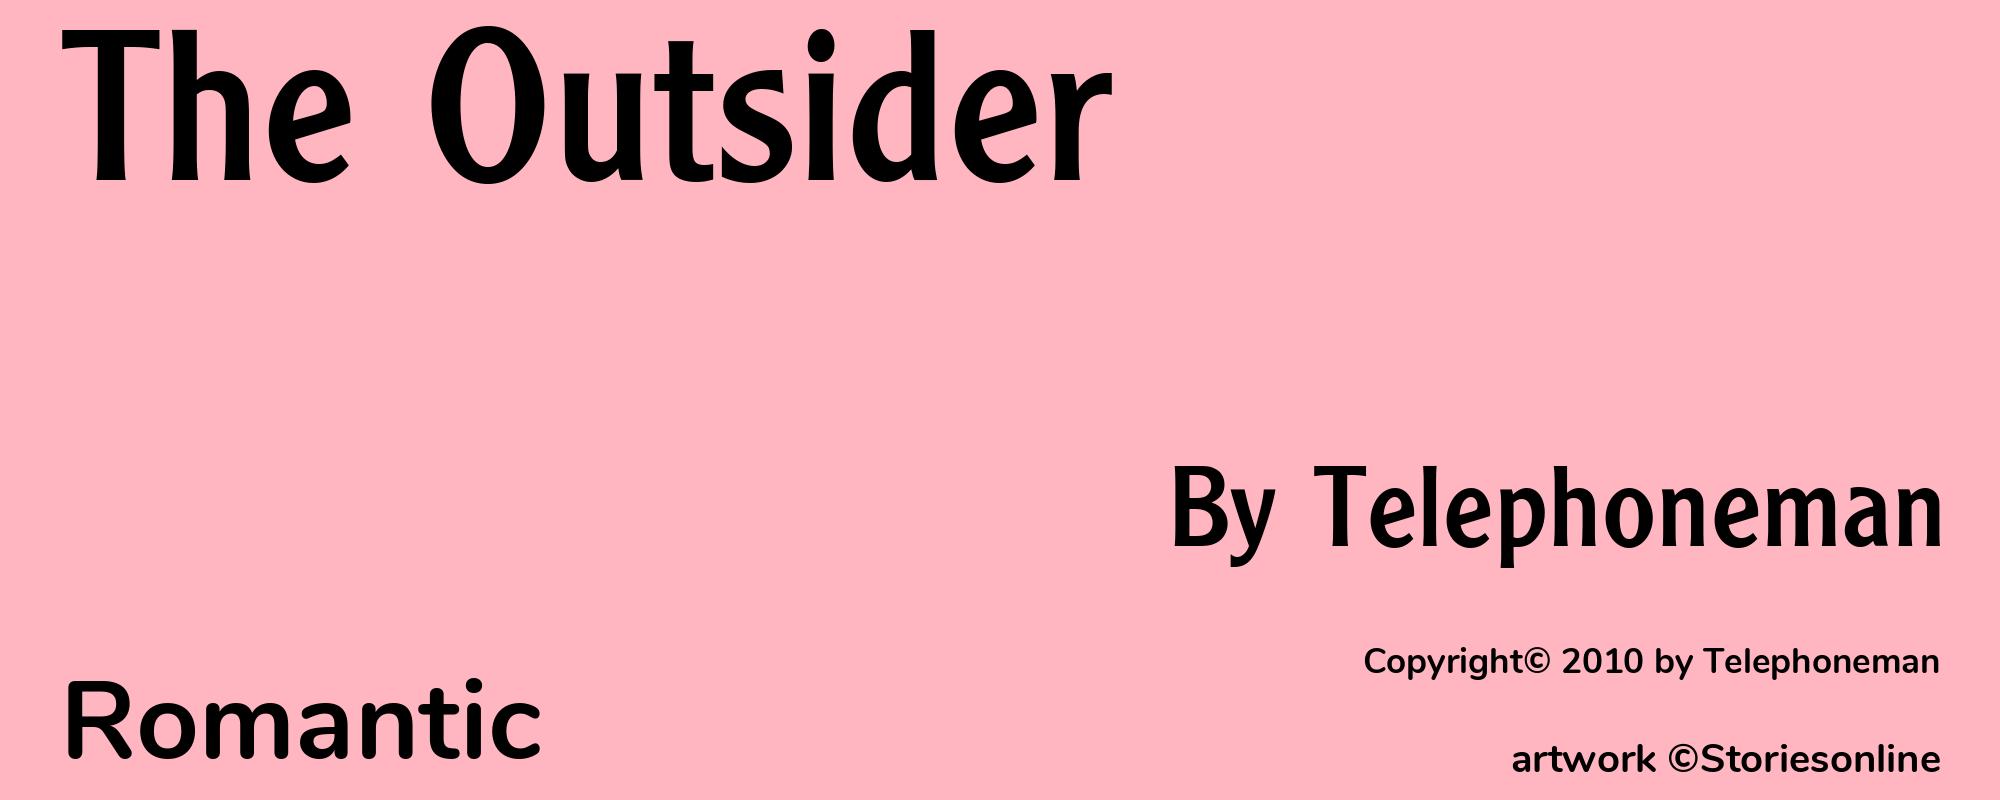 The Outsider - Cover